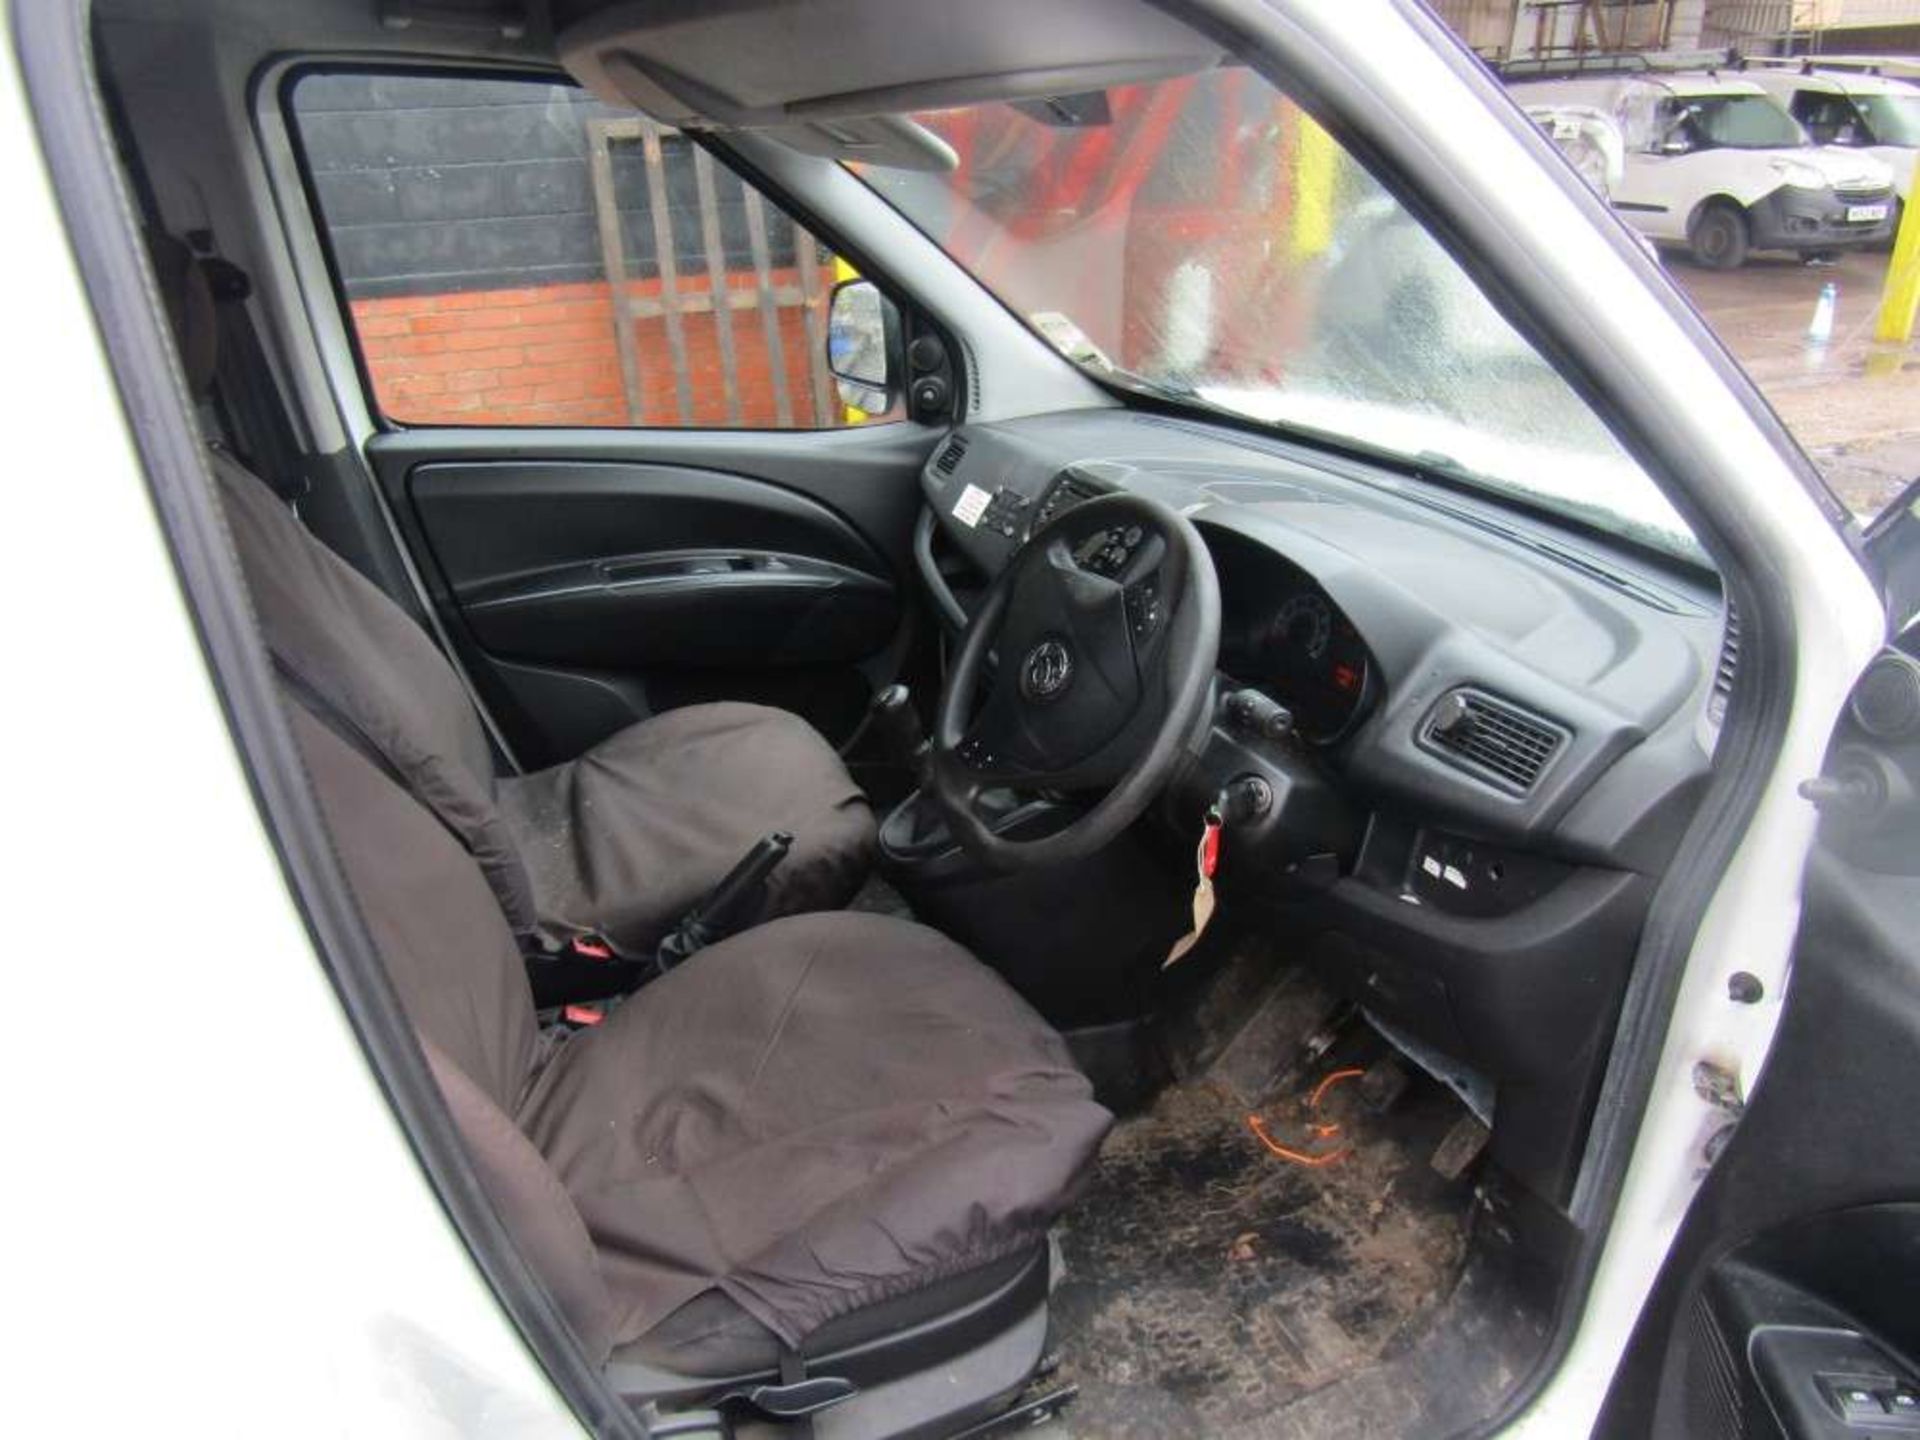 2014 14 reg Vauxhall Combo 2300 L1H1 CDTI (Runs & Drives but engine issues) (Direct UU Water) - Image 6 of 7